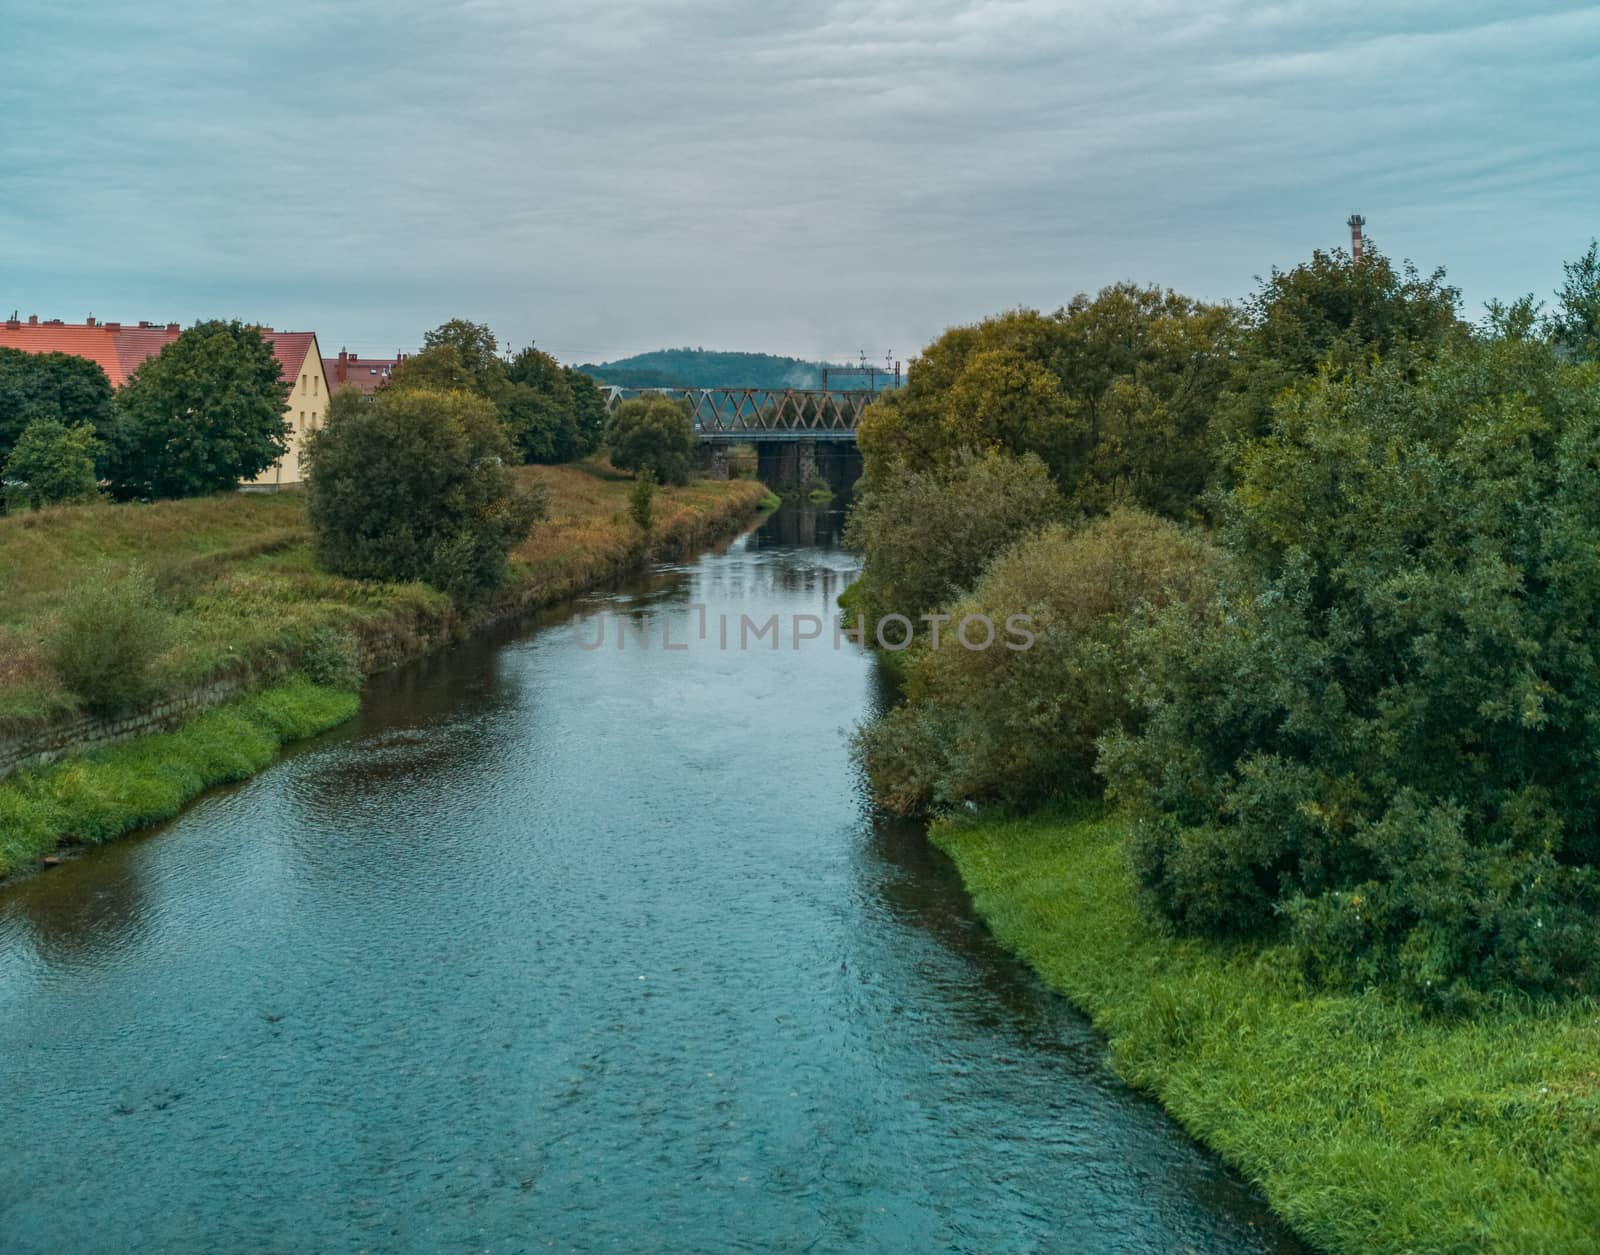 Cloudy Landscape of small river between bushes and trees with train bridge over it